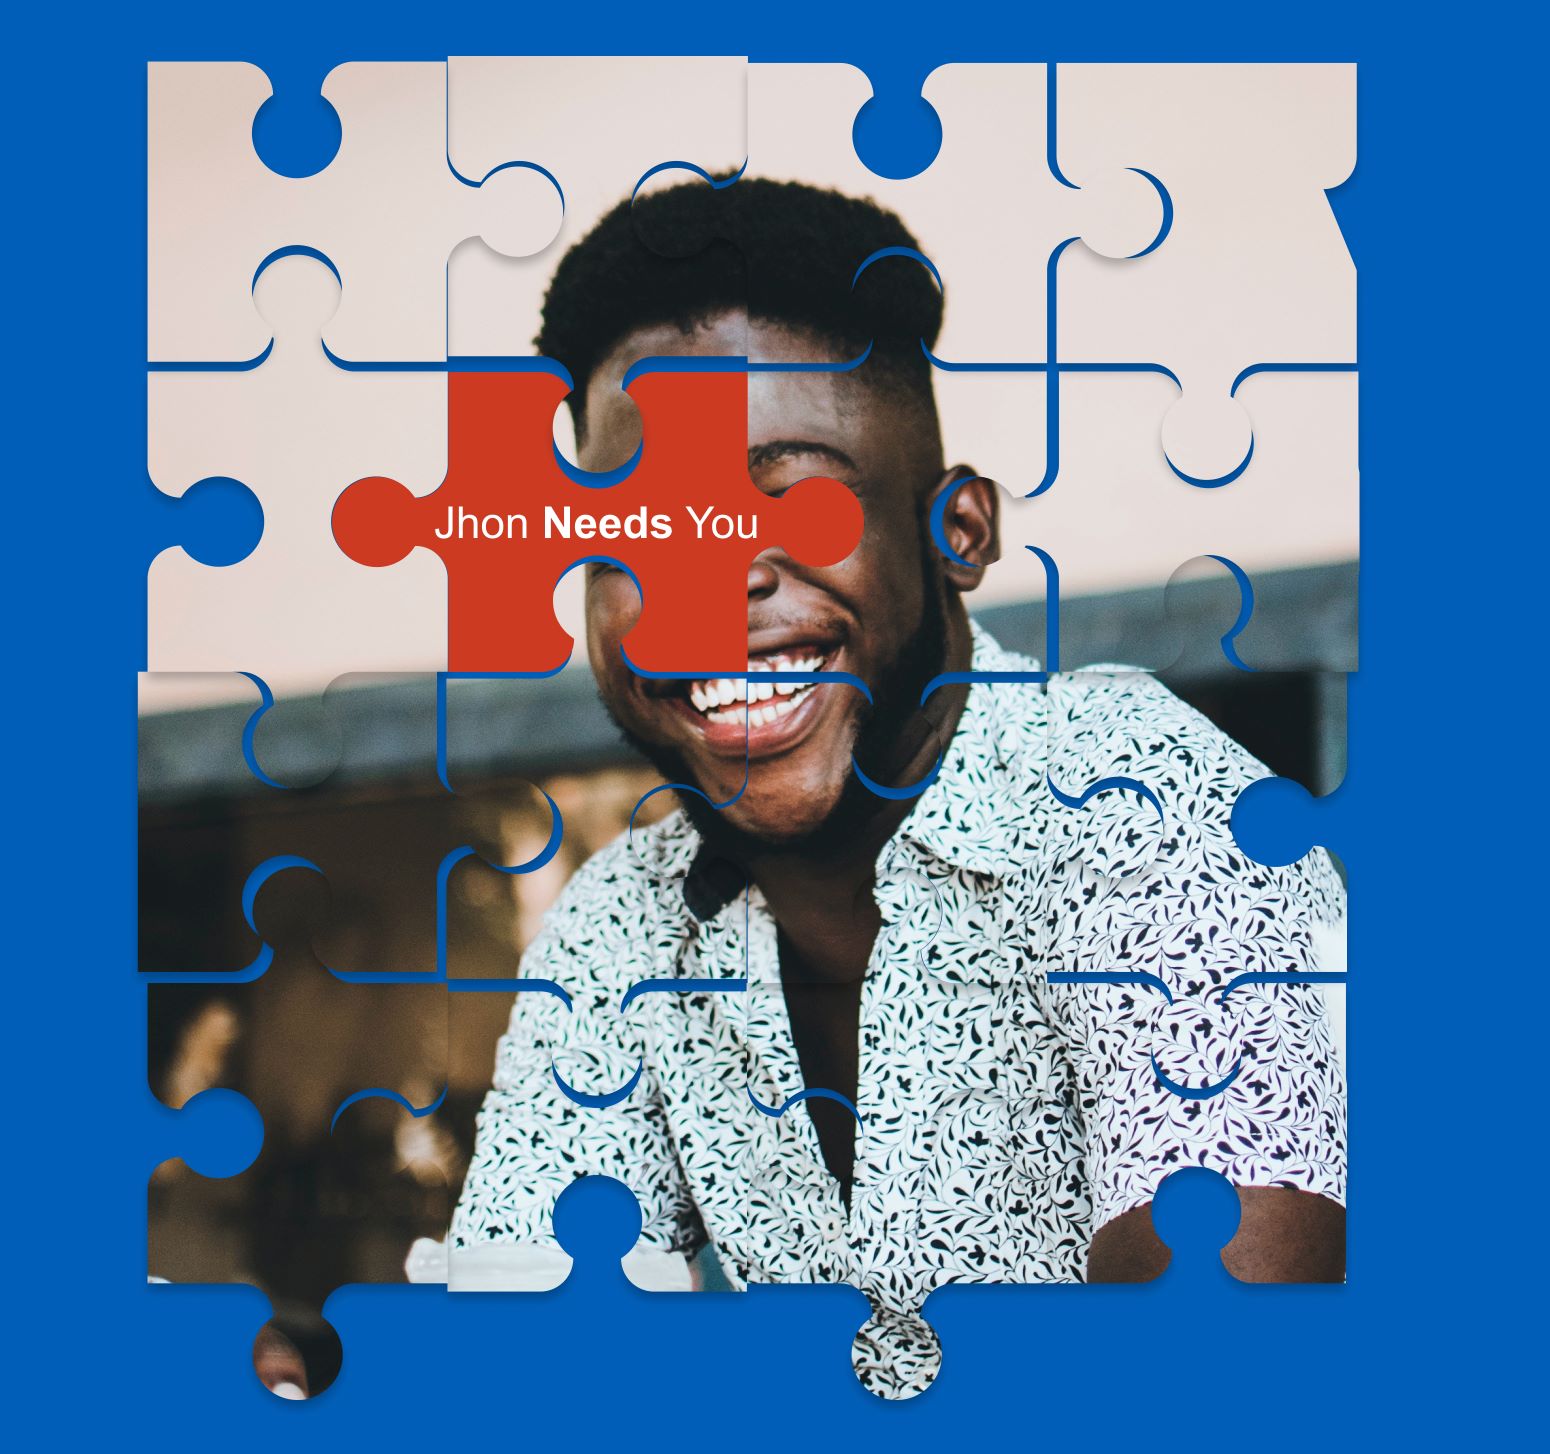 Campaign jigsaw picture, showing a missing piece with the words "Jhon needs you"